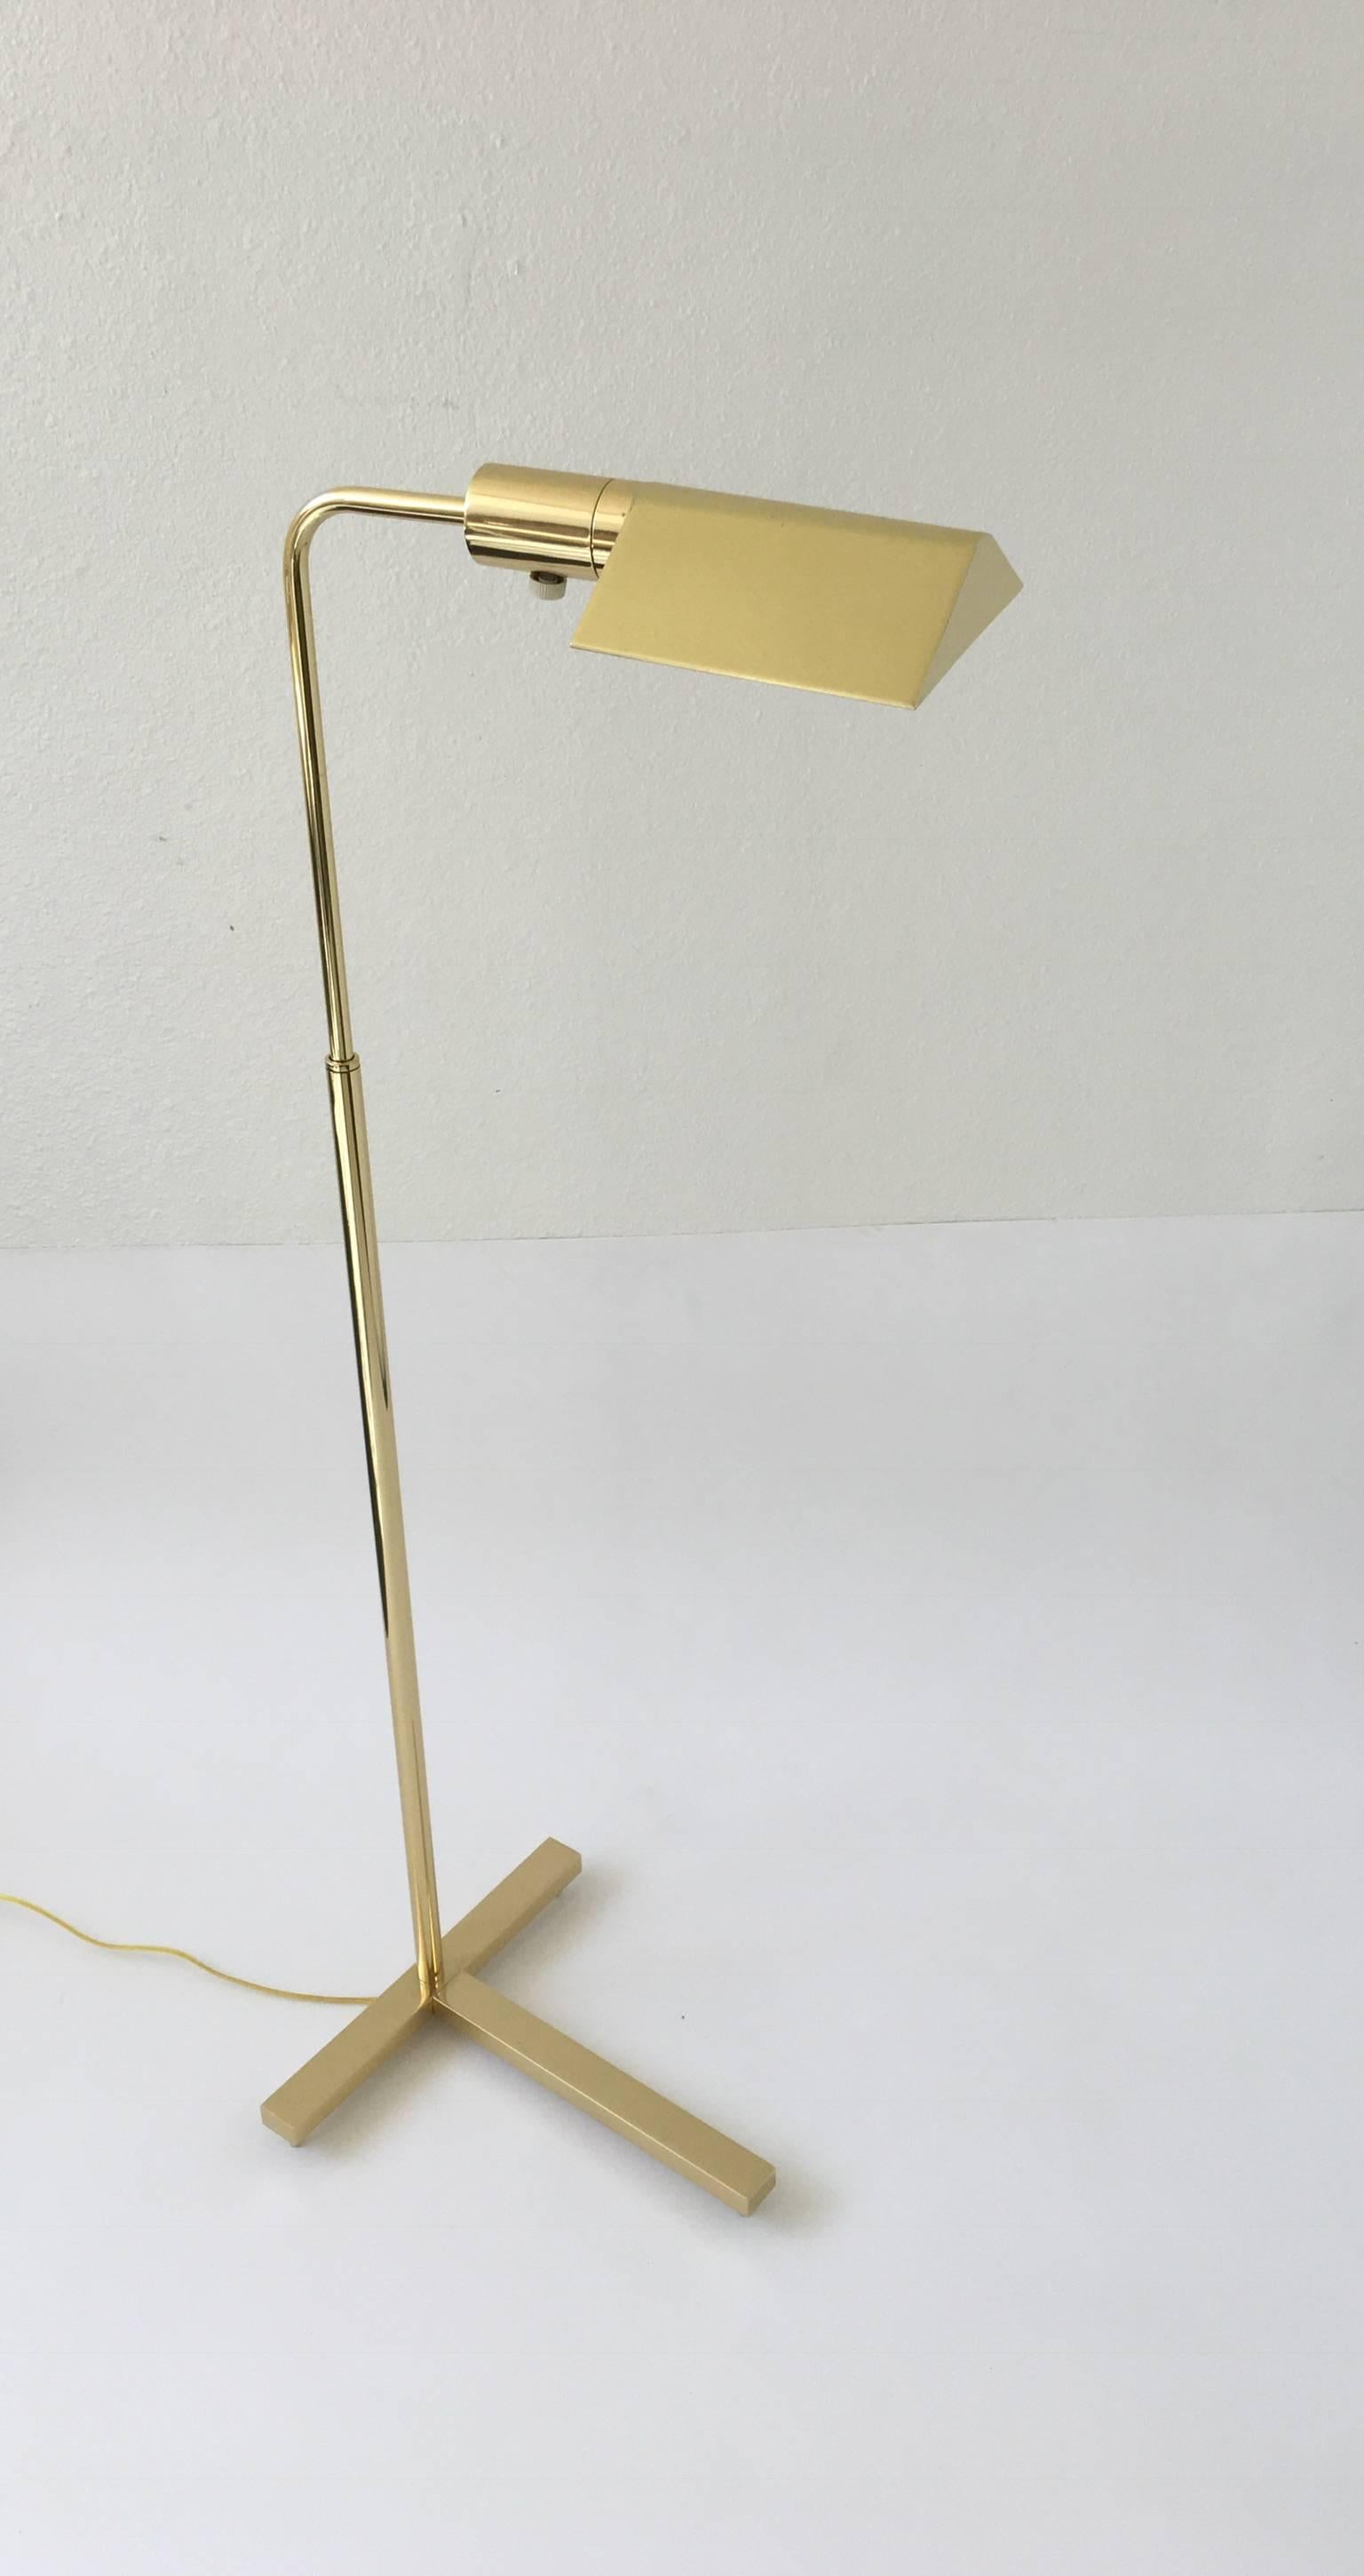 A beautiful polished brass adjustable reading floor lamp by Casella lighting.
The lamp has been newly re-plated and rewired with a full range control dimmer. The lamp can be turned 360* and lower and raised. When the lamp is raised all the way up